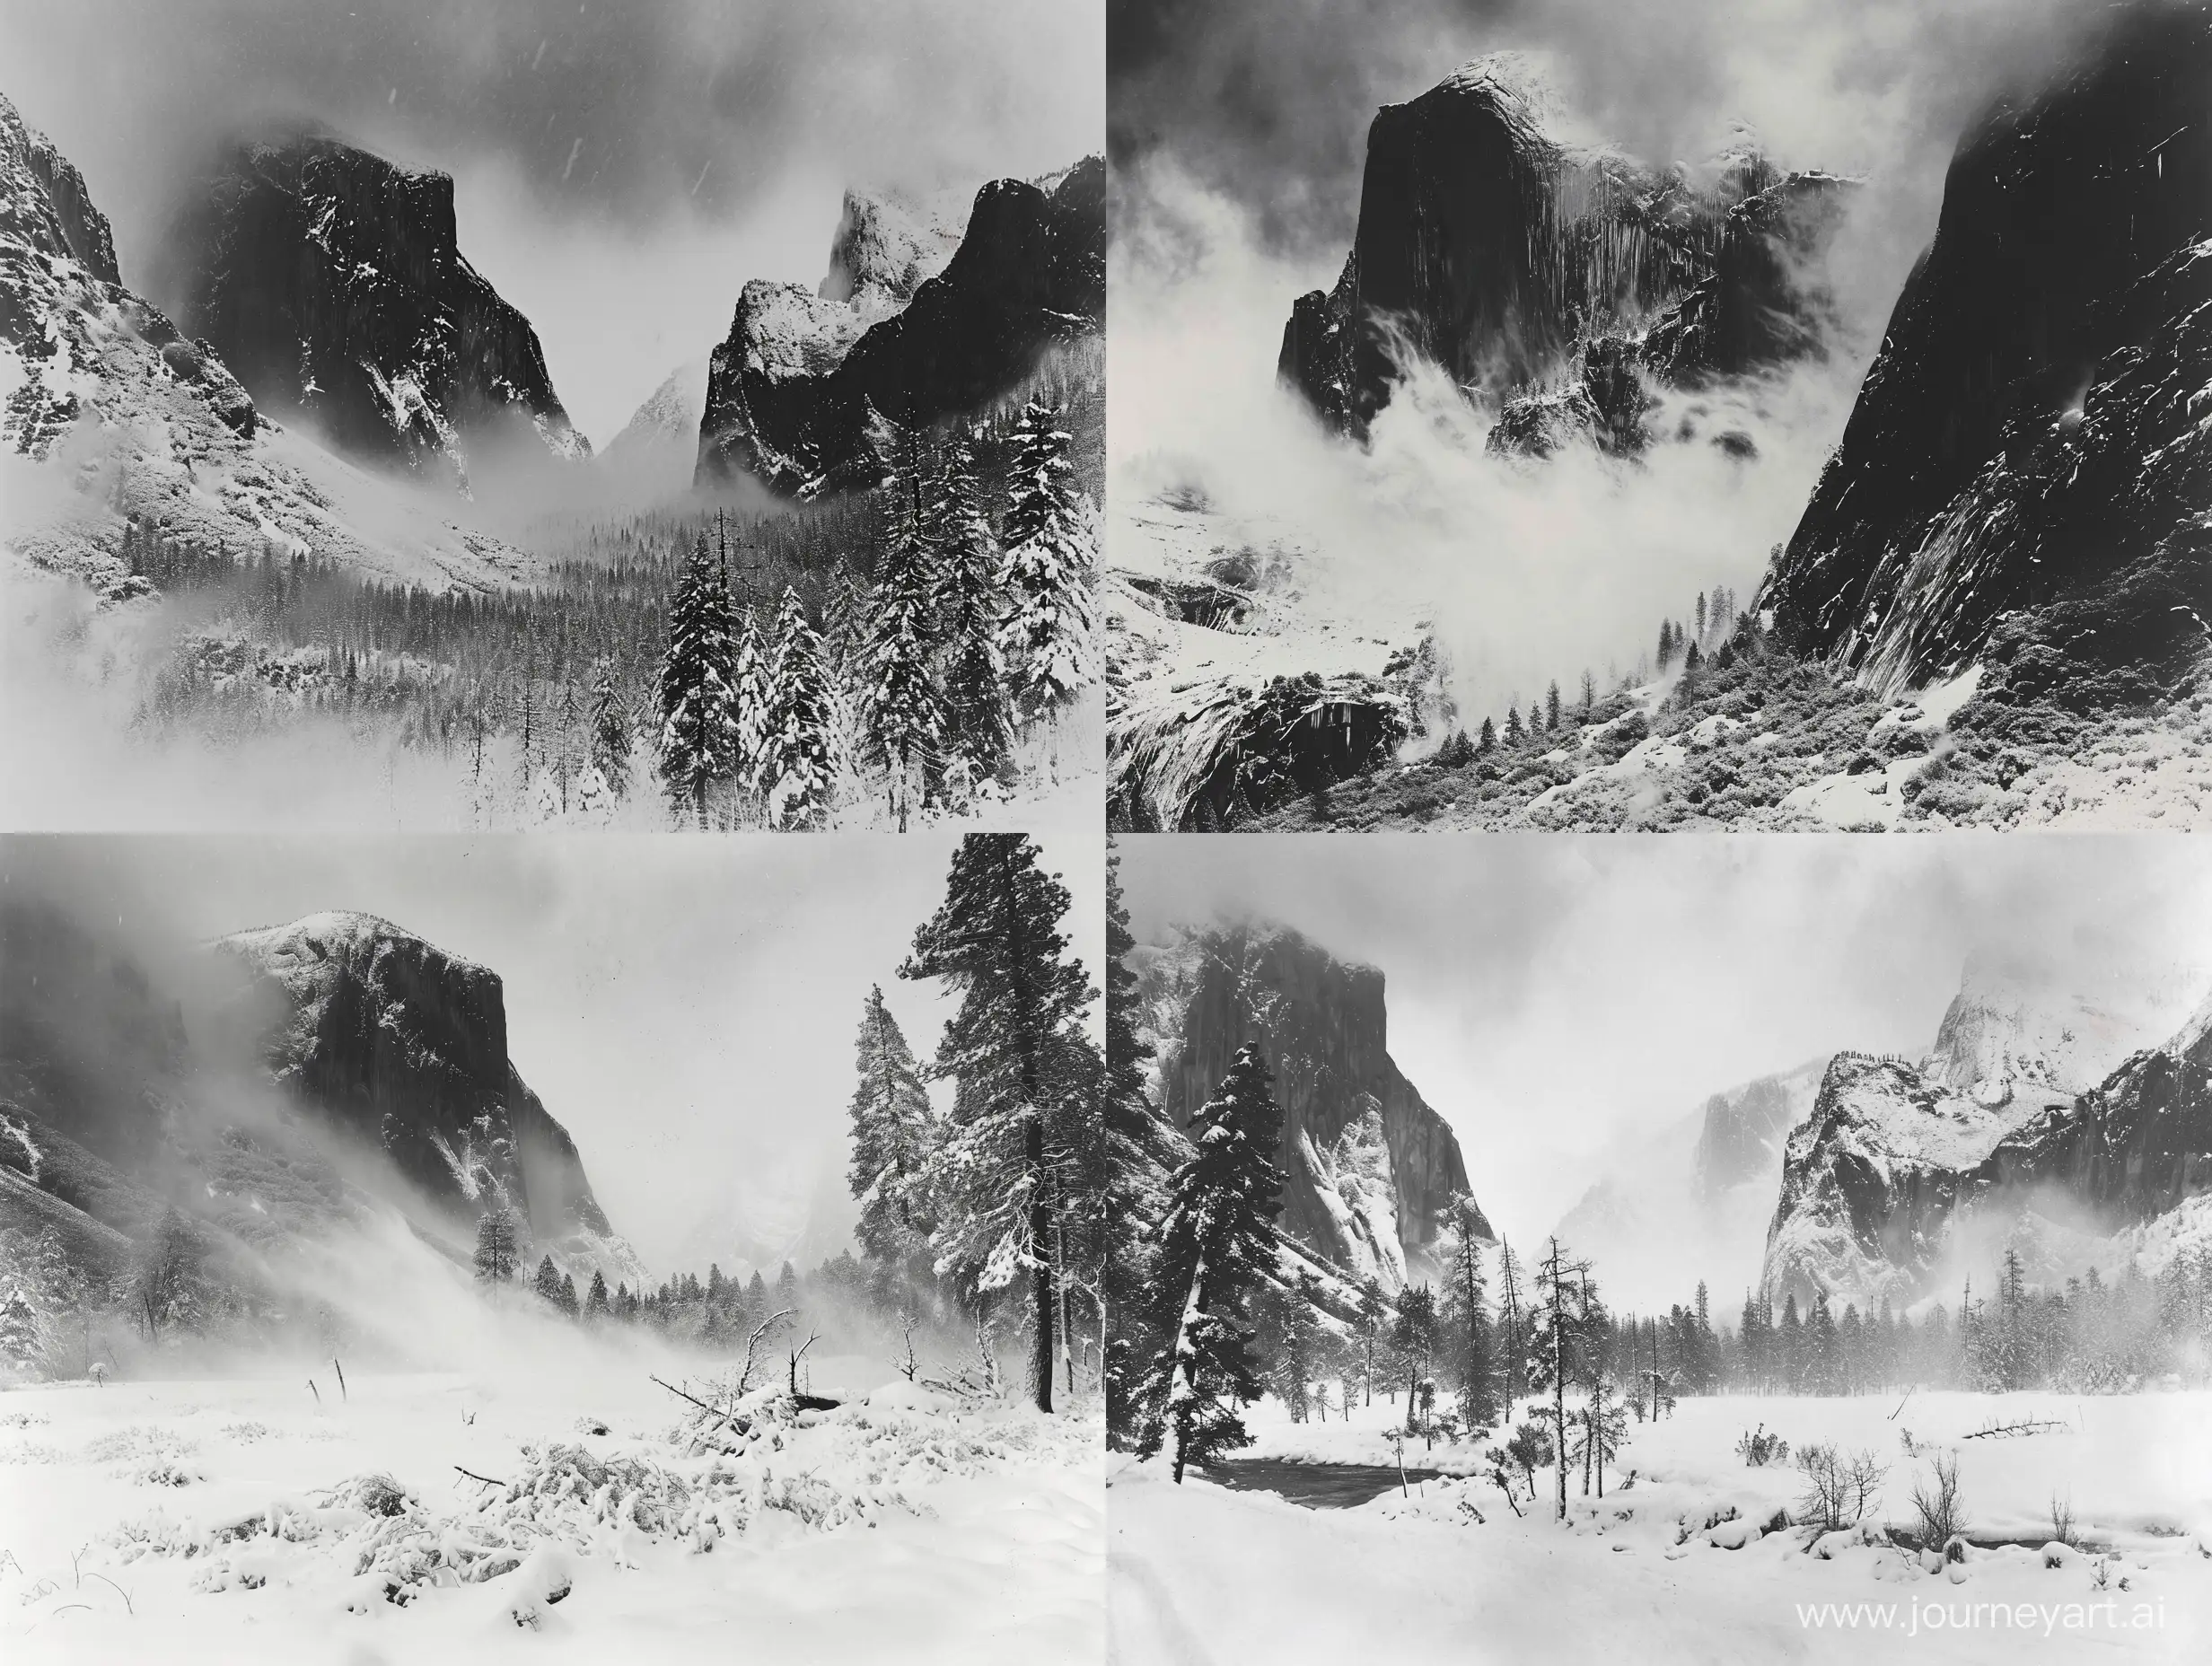 Captivating-Clearing-Winter-Storm-in-Yosemite-National-Park-1937